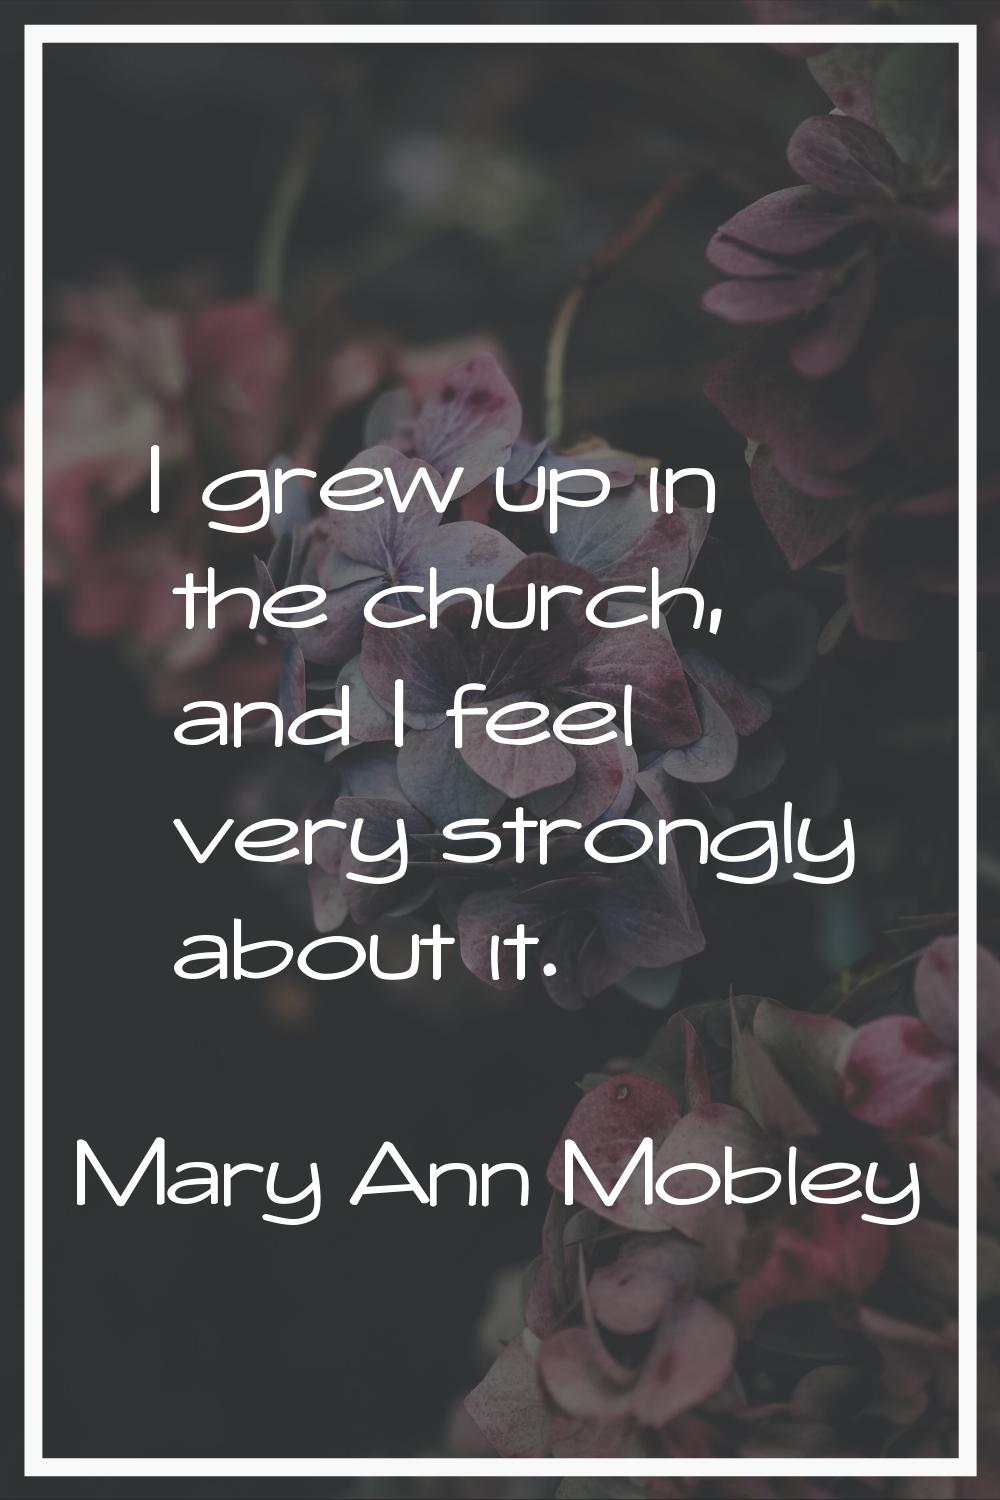 I grew up in the church, and I feel very strongly about it.